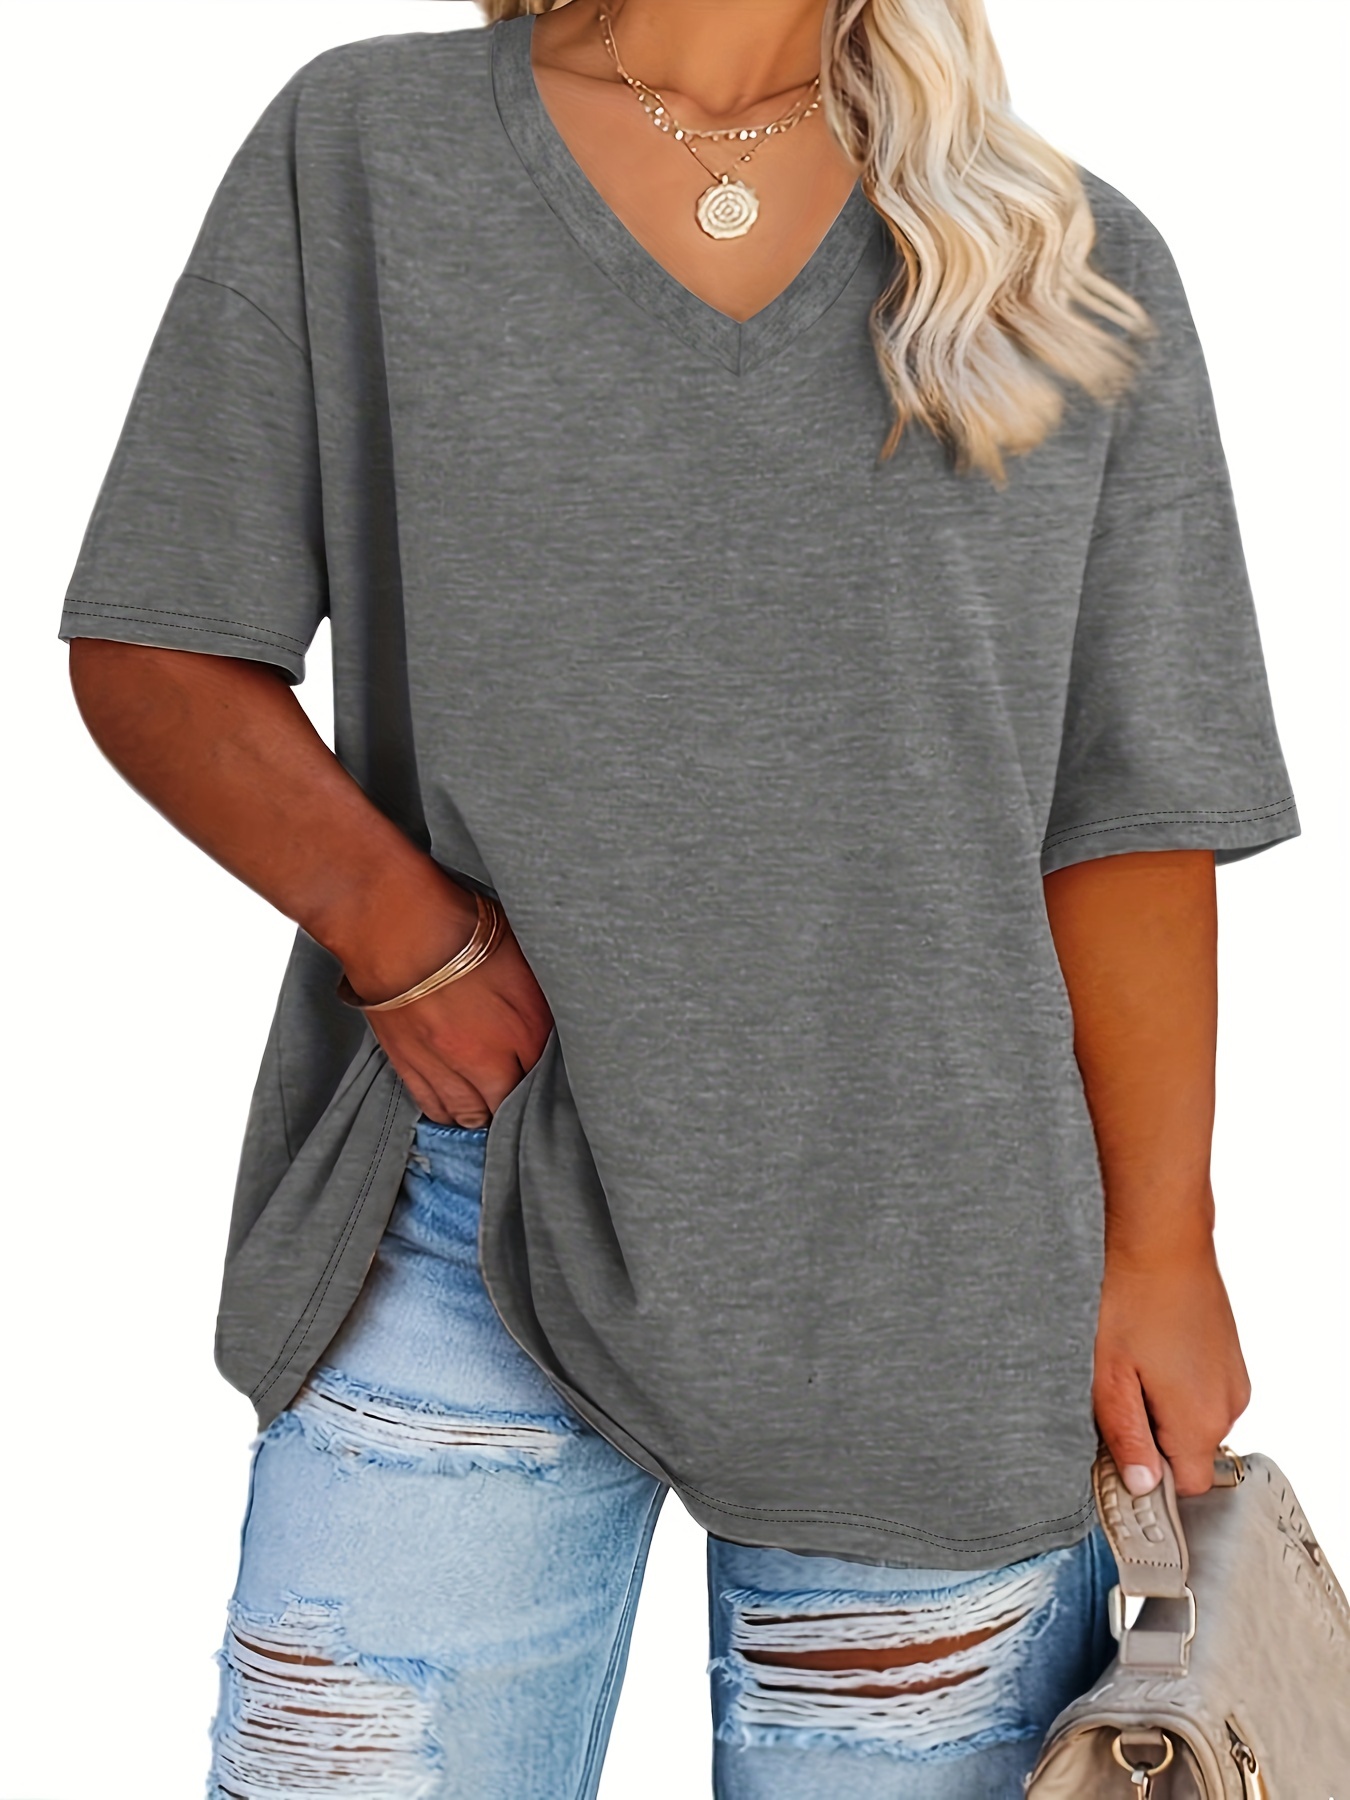 SELONE Plus Size Tops for Women Work Short Sleeve Tops Blouses Regular Fit  T Shirts Pullover Tops Tees Tops Solid T-Shirts V Neck Tops Blouses T